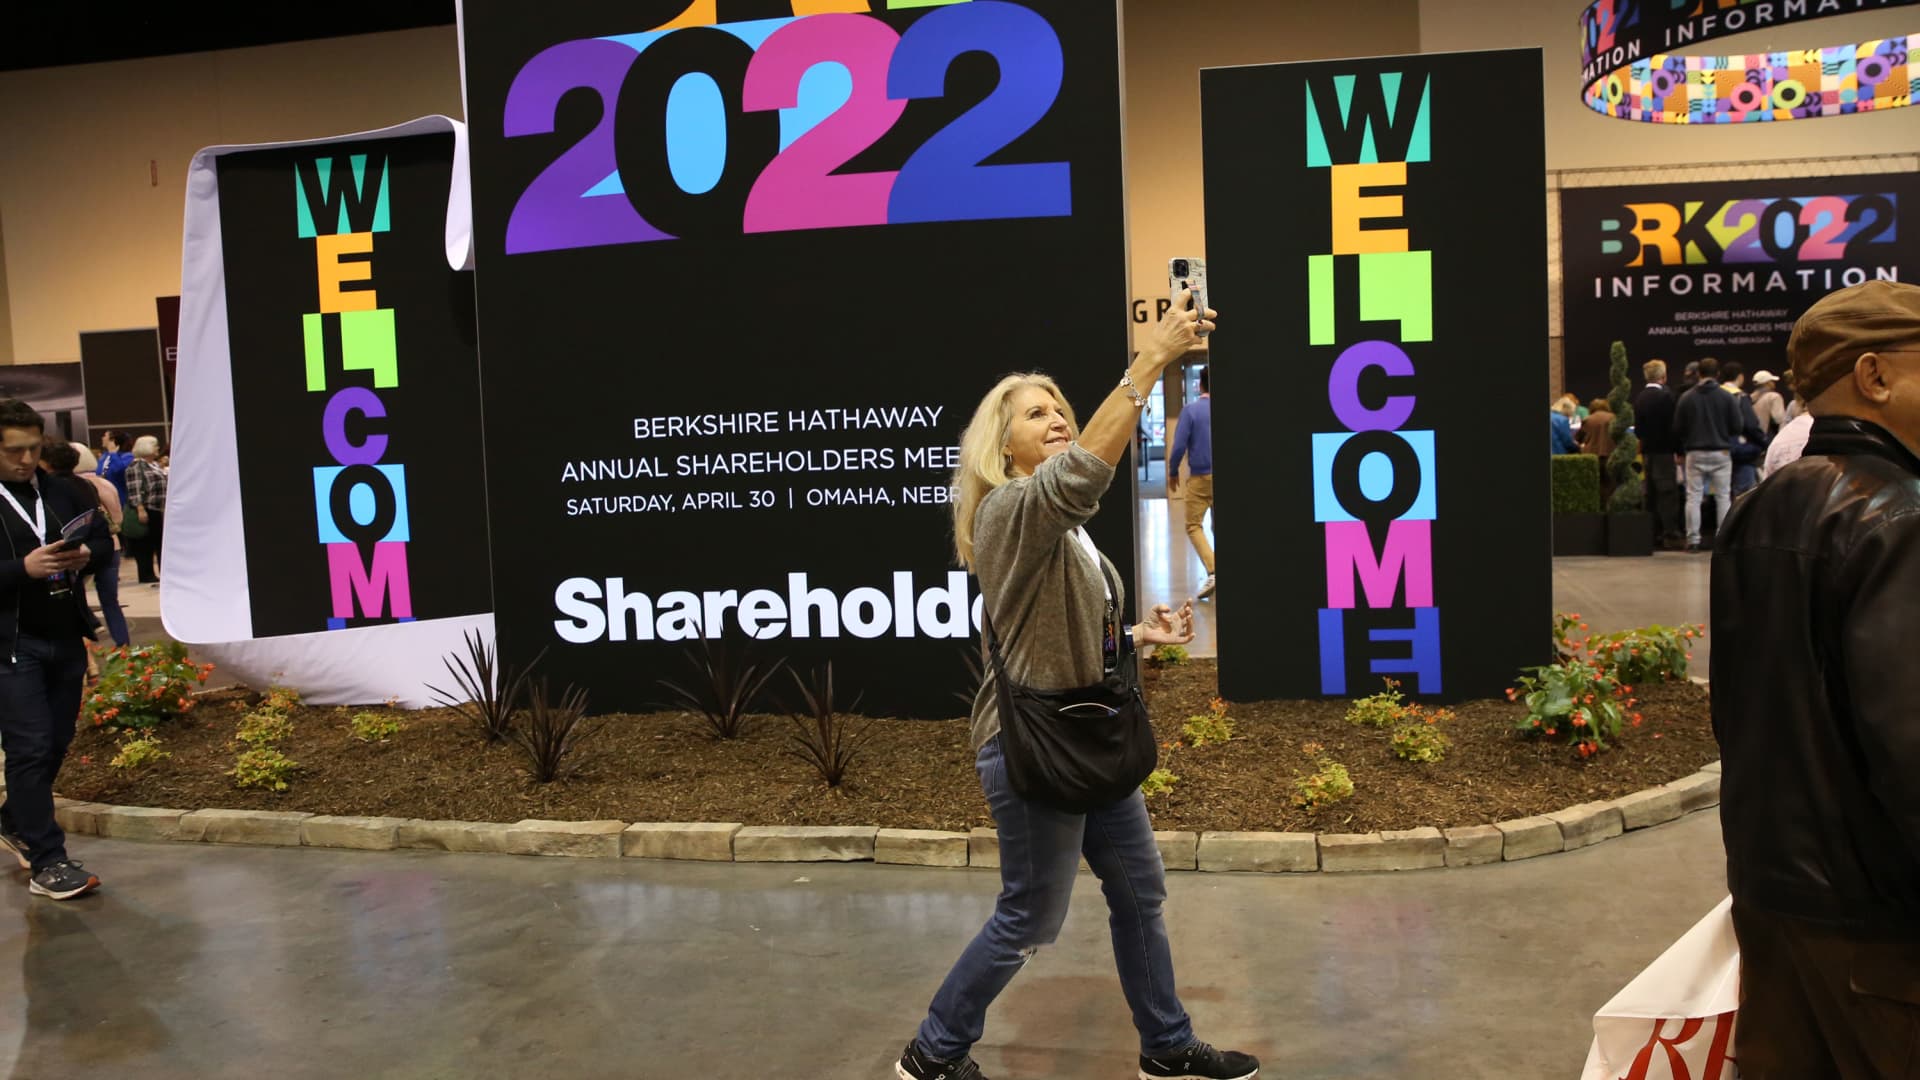 A woman takes a selfie in front of Berkshire Hathaway signage at the Berkshire Hathaway Annual Shareholders Meeting in Omaha, Nebraska.